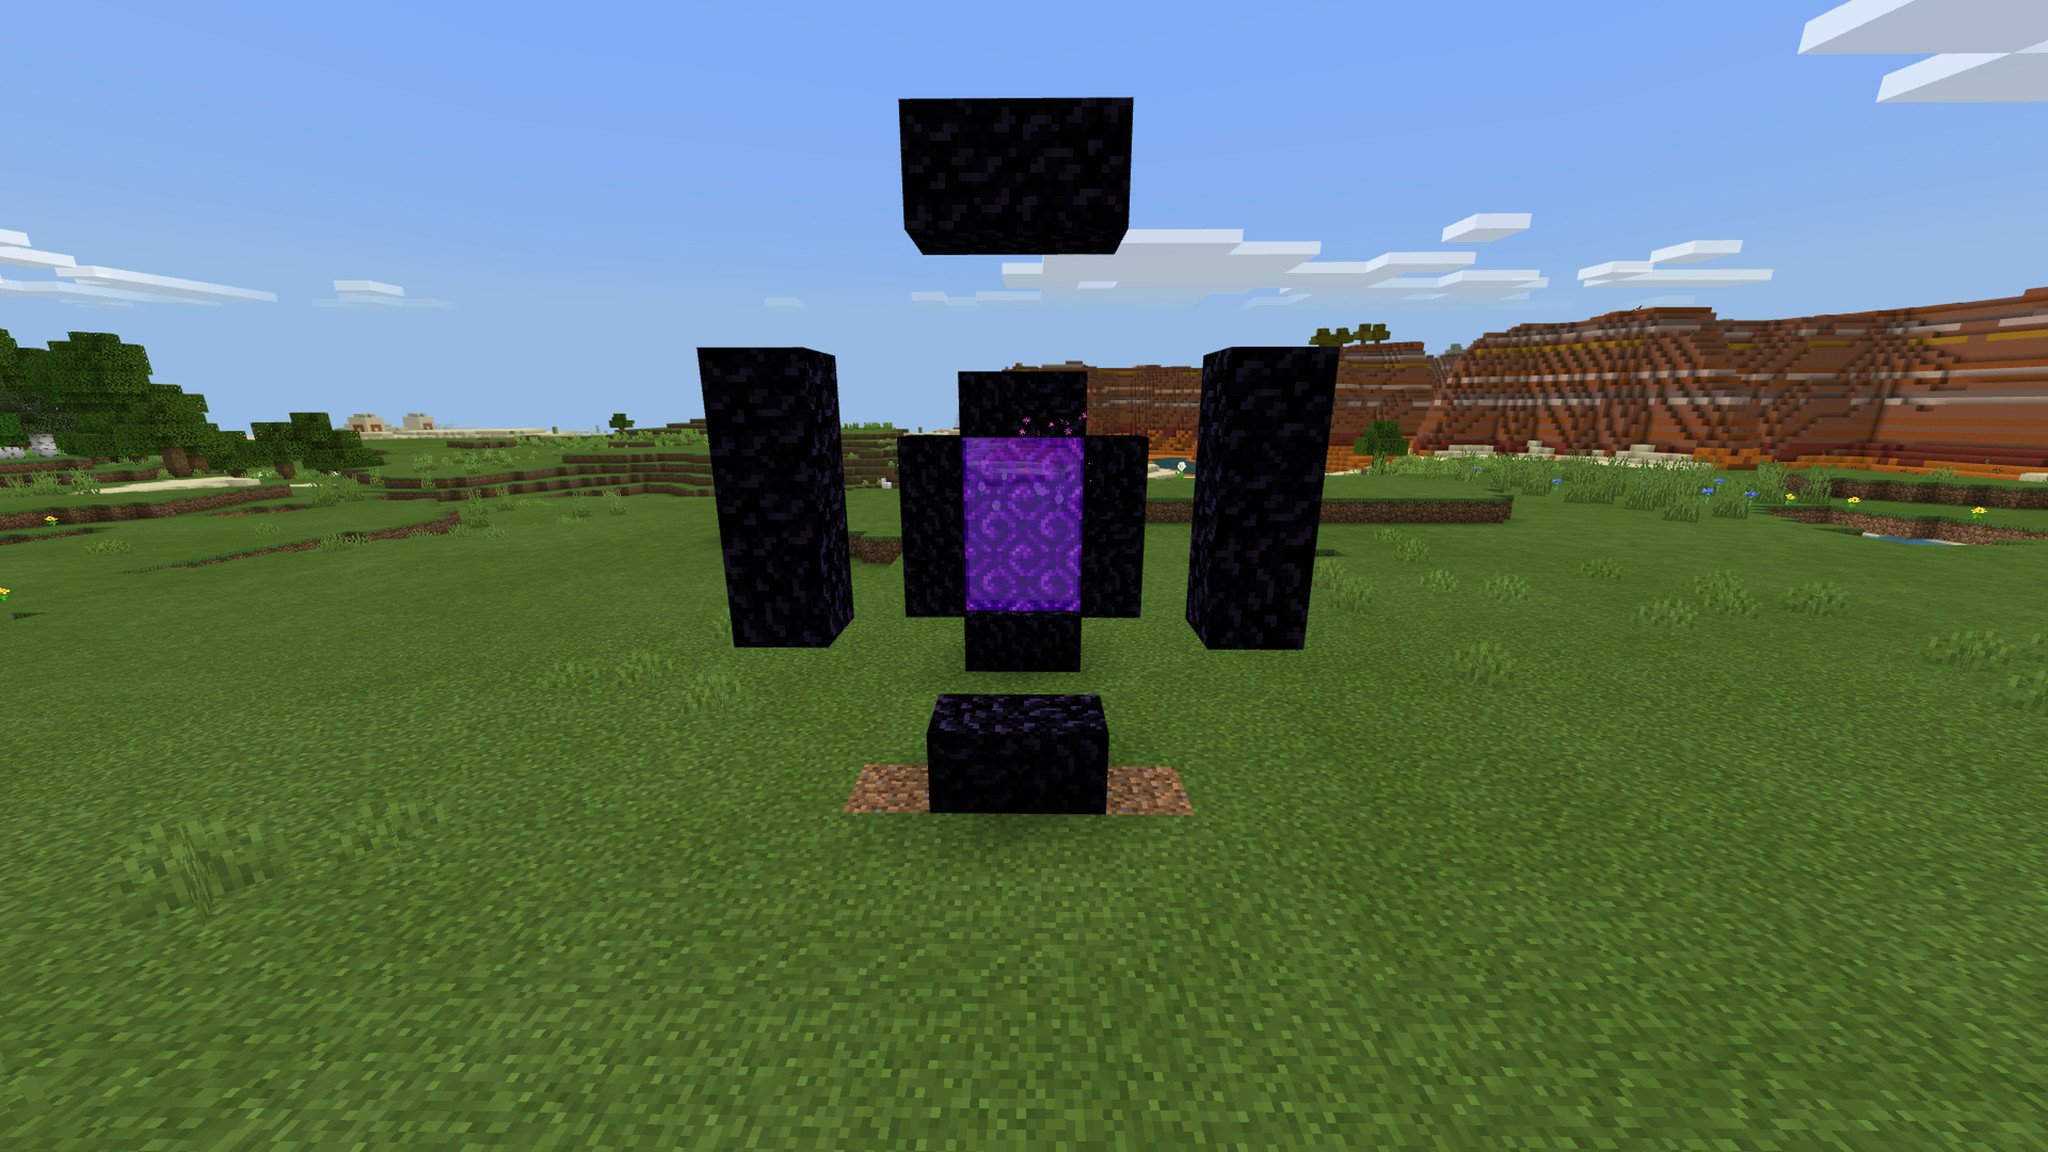 Minecraft guide: How to build a nether portal quickly and easily